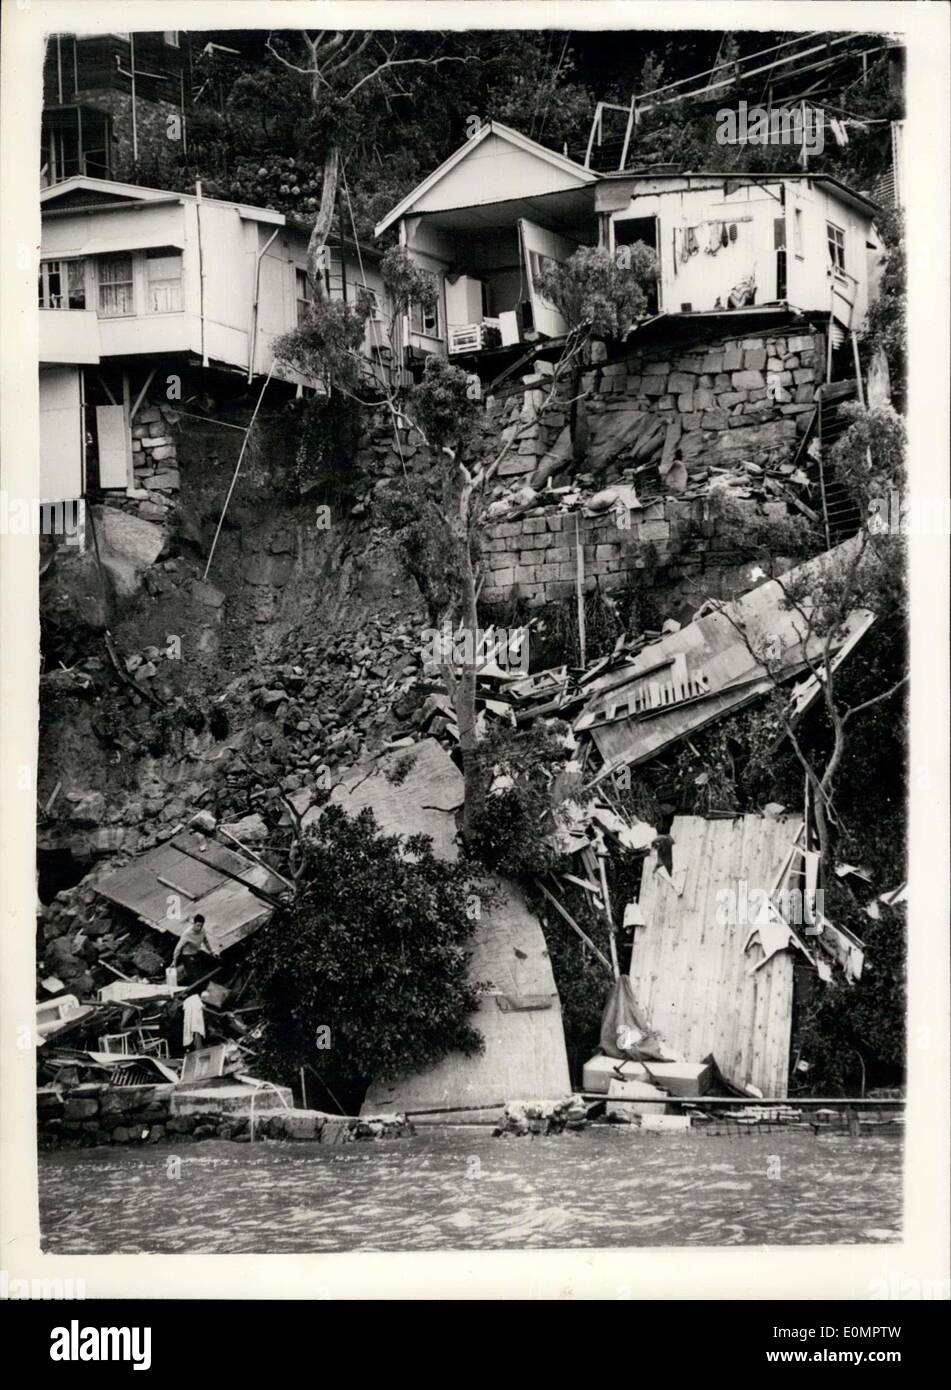 Feb. 18, 1956 - Flood waters undermine house foundations at Seaforth, new South Wales buildings crash in harbour; Photo Shows View of the wreckage after flood waters had undermined the rock foundations of houses which crashed into the harbour at Seaforth Crescent, Seaforth, New South Wales during the recent floods which are sweeping across large areas of Australia. Only one man is believed to have lost his life in this incident but the flood damage is thought to have run into millions. Stock Photo